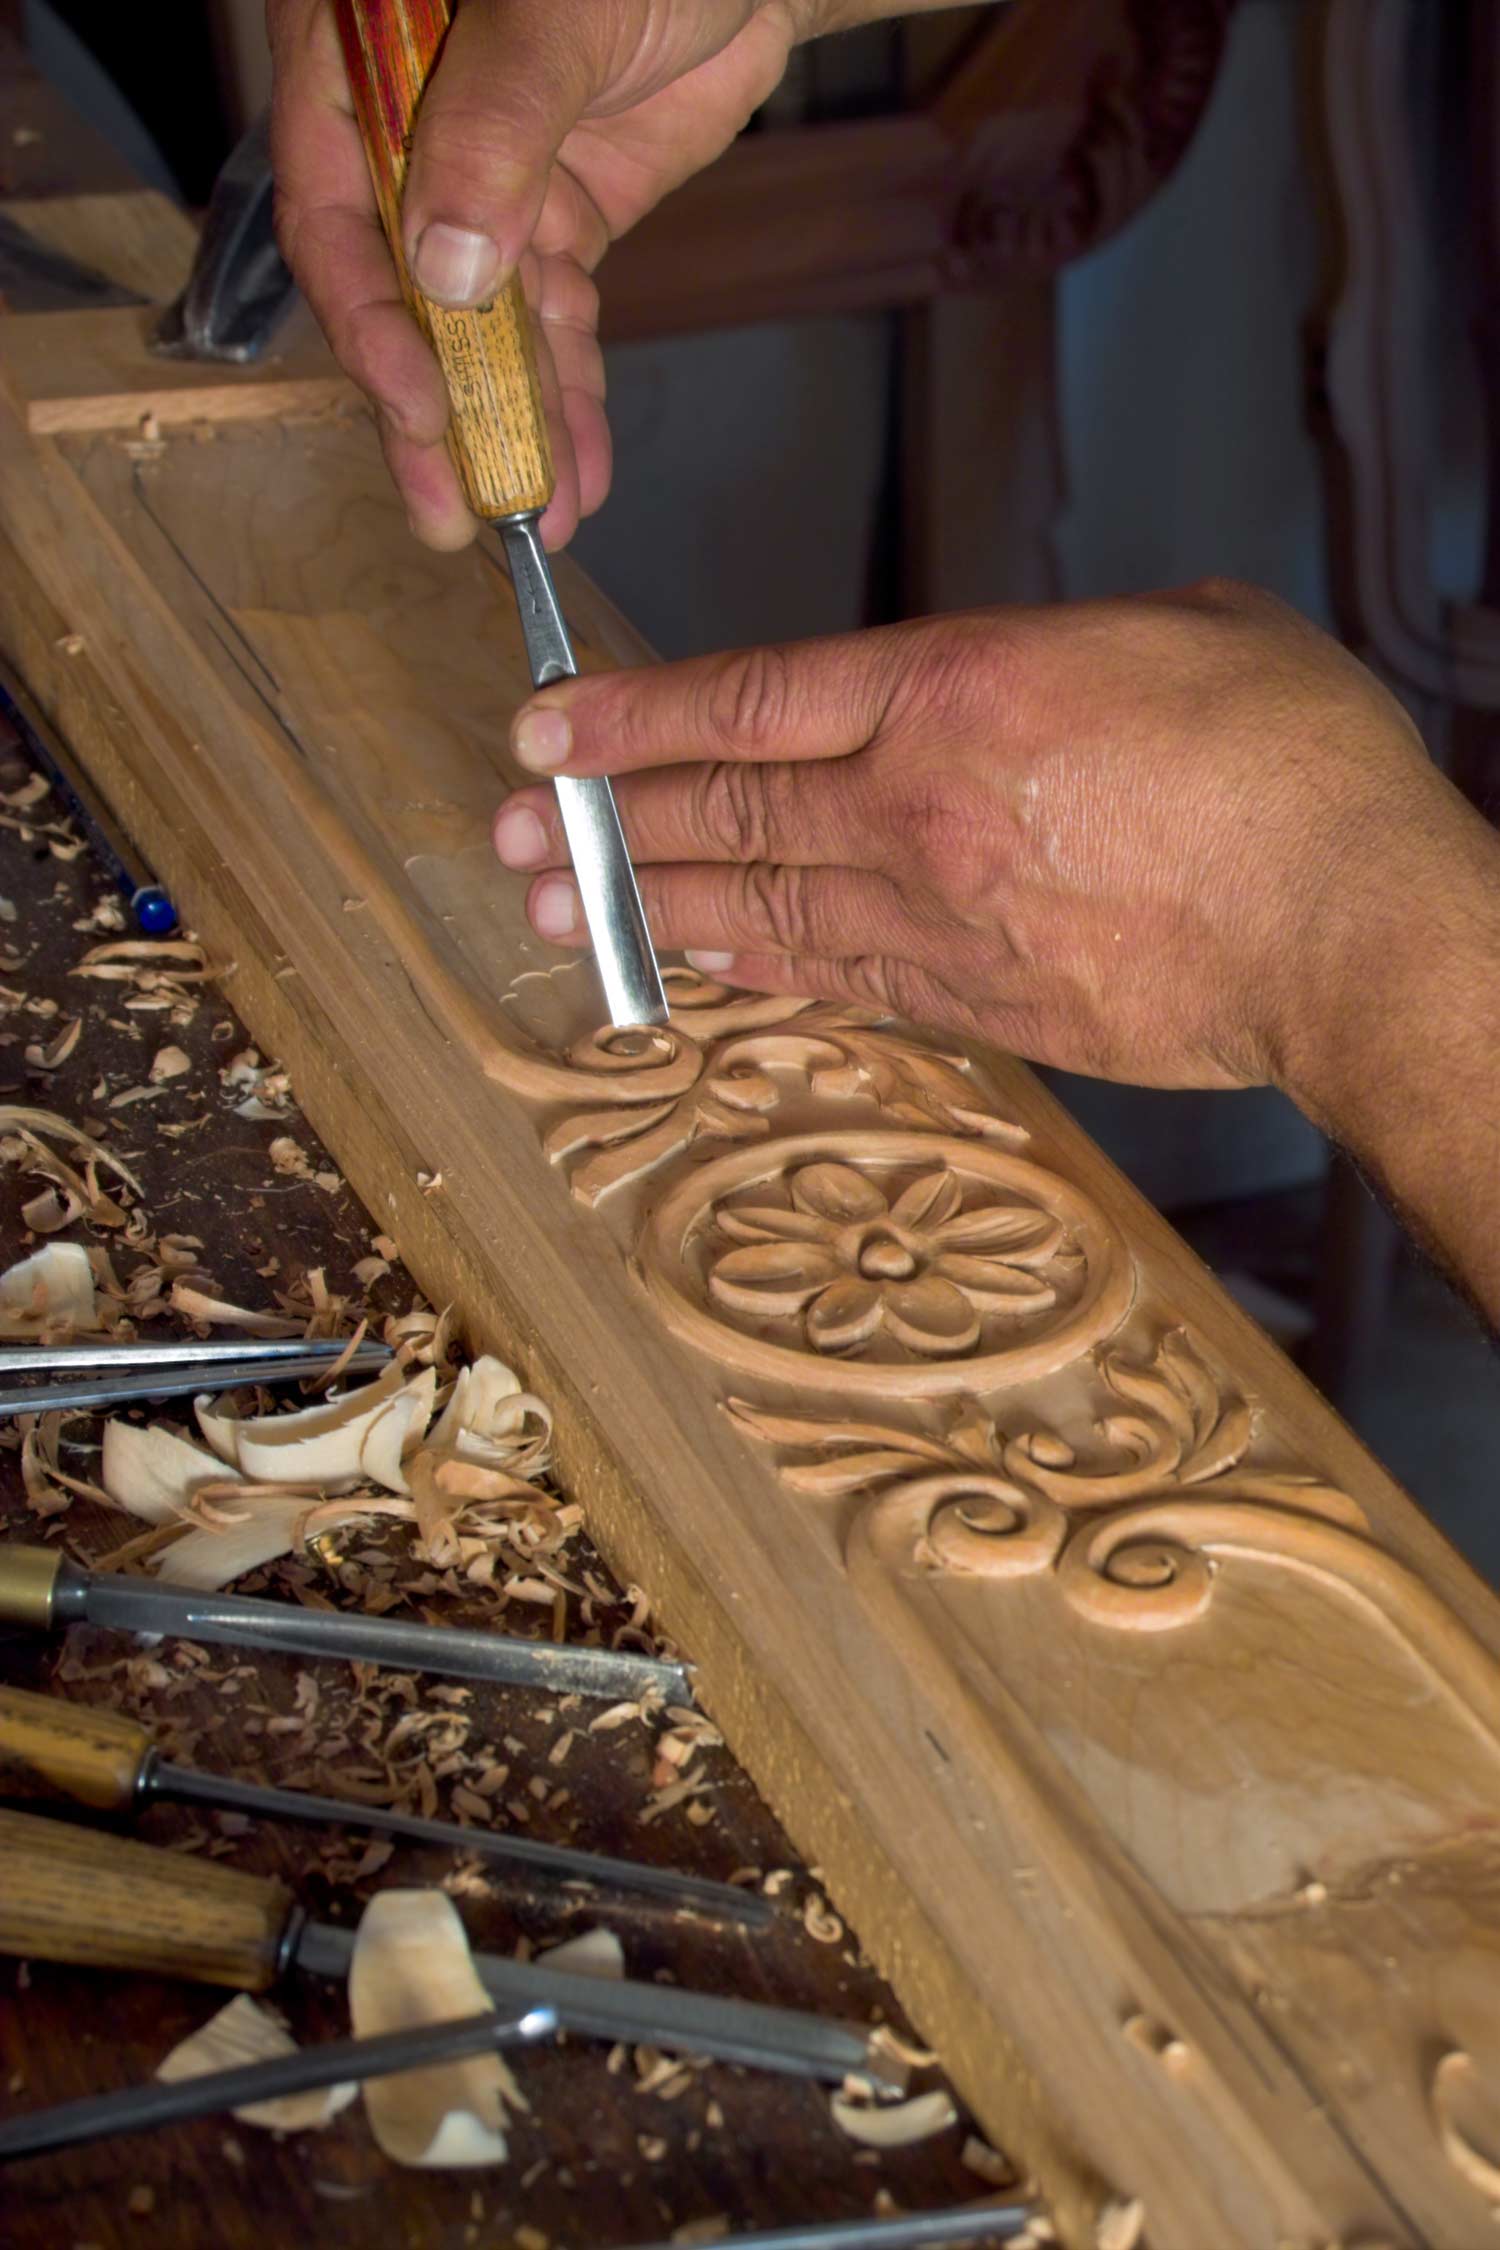 2 Craftsman working on a timber panel carving floral ornate details by hand